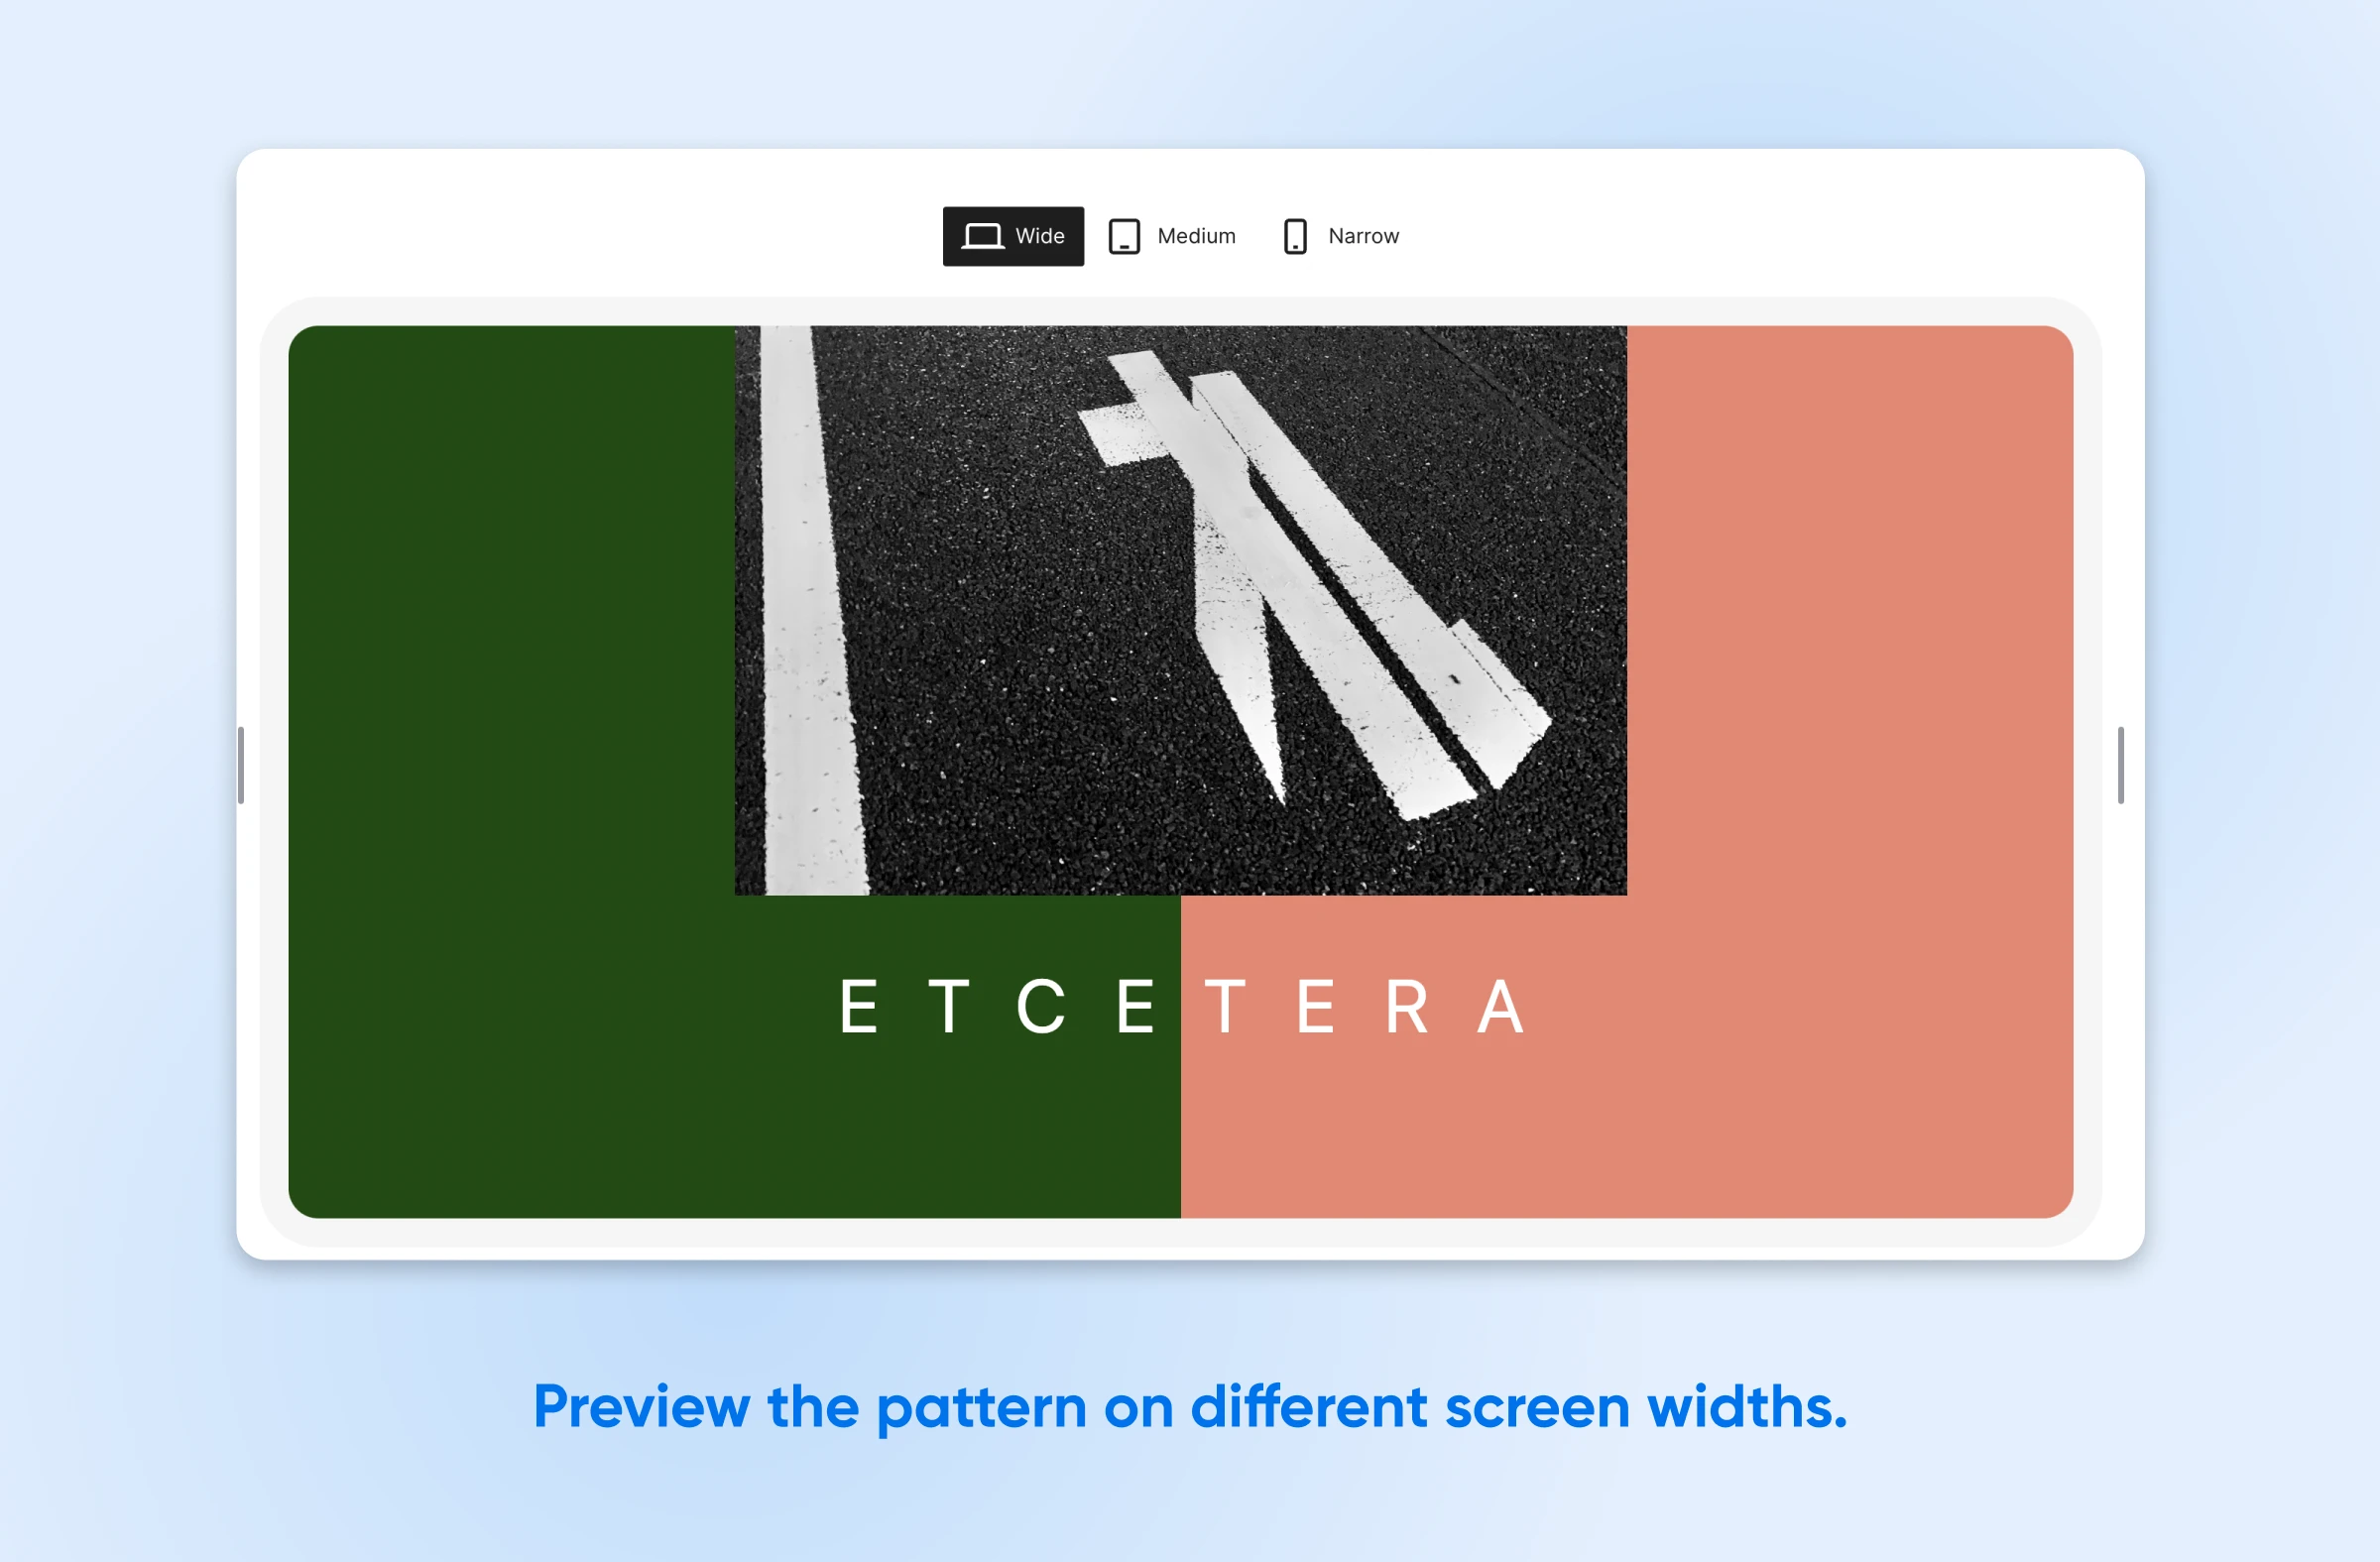 A wide-screen pattern preview shows the word 'etcetera' against a green and salmon background 